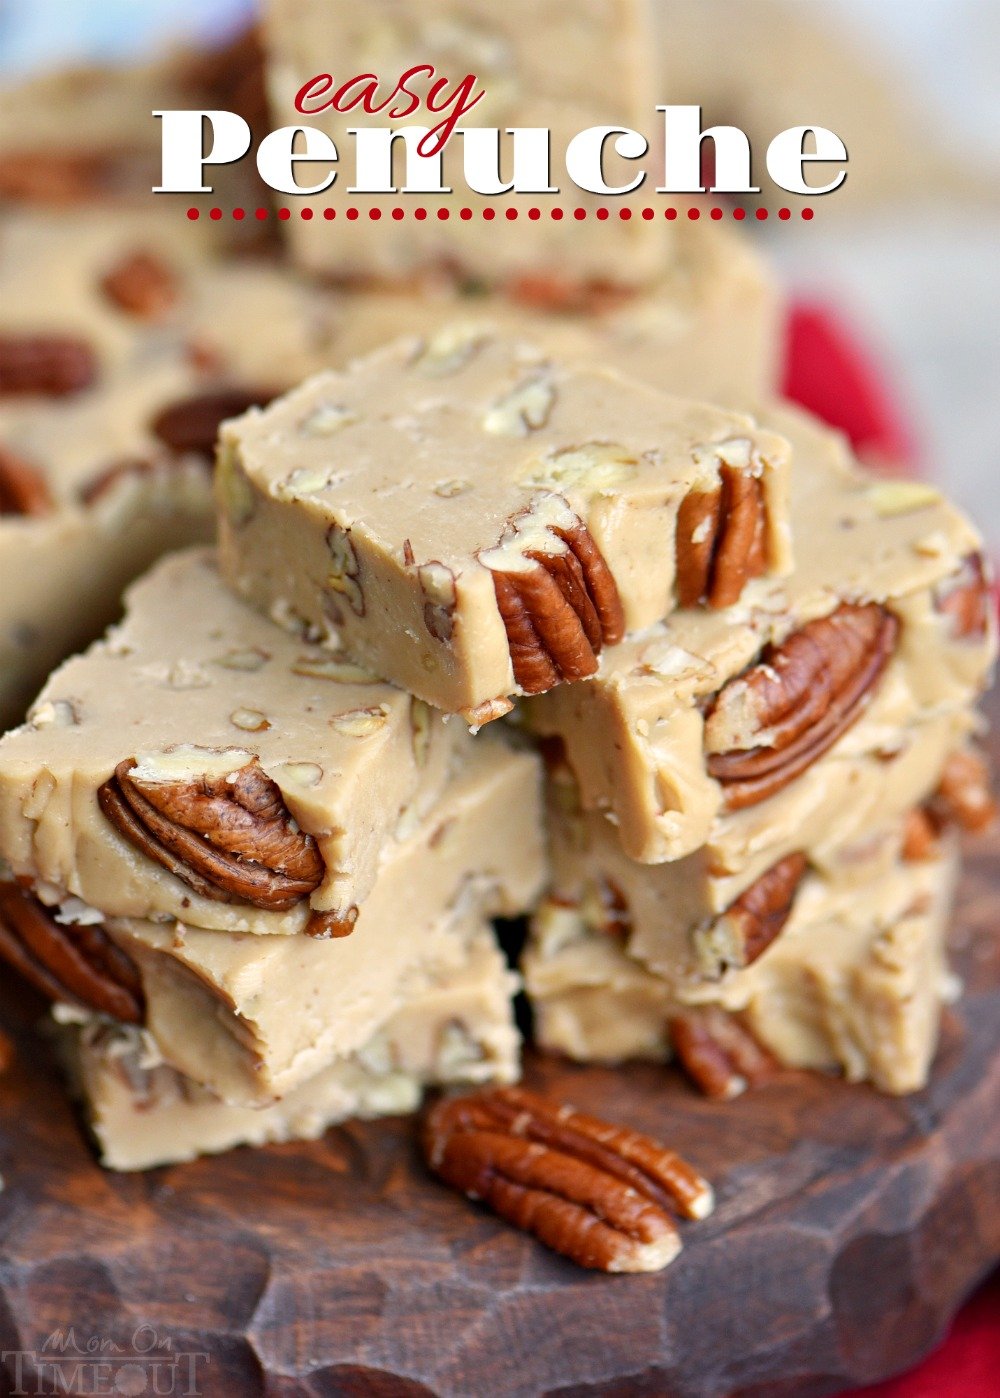 This wonderfully easy Penuche recipe will blow you away with it's amazing brown sugar flavor and creamy texture! Perfect for the holidays and a tasty addition to cookie trays and dessert tables! // Mom On Timeout